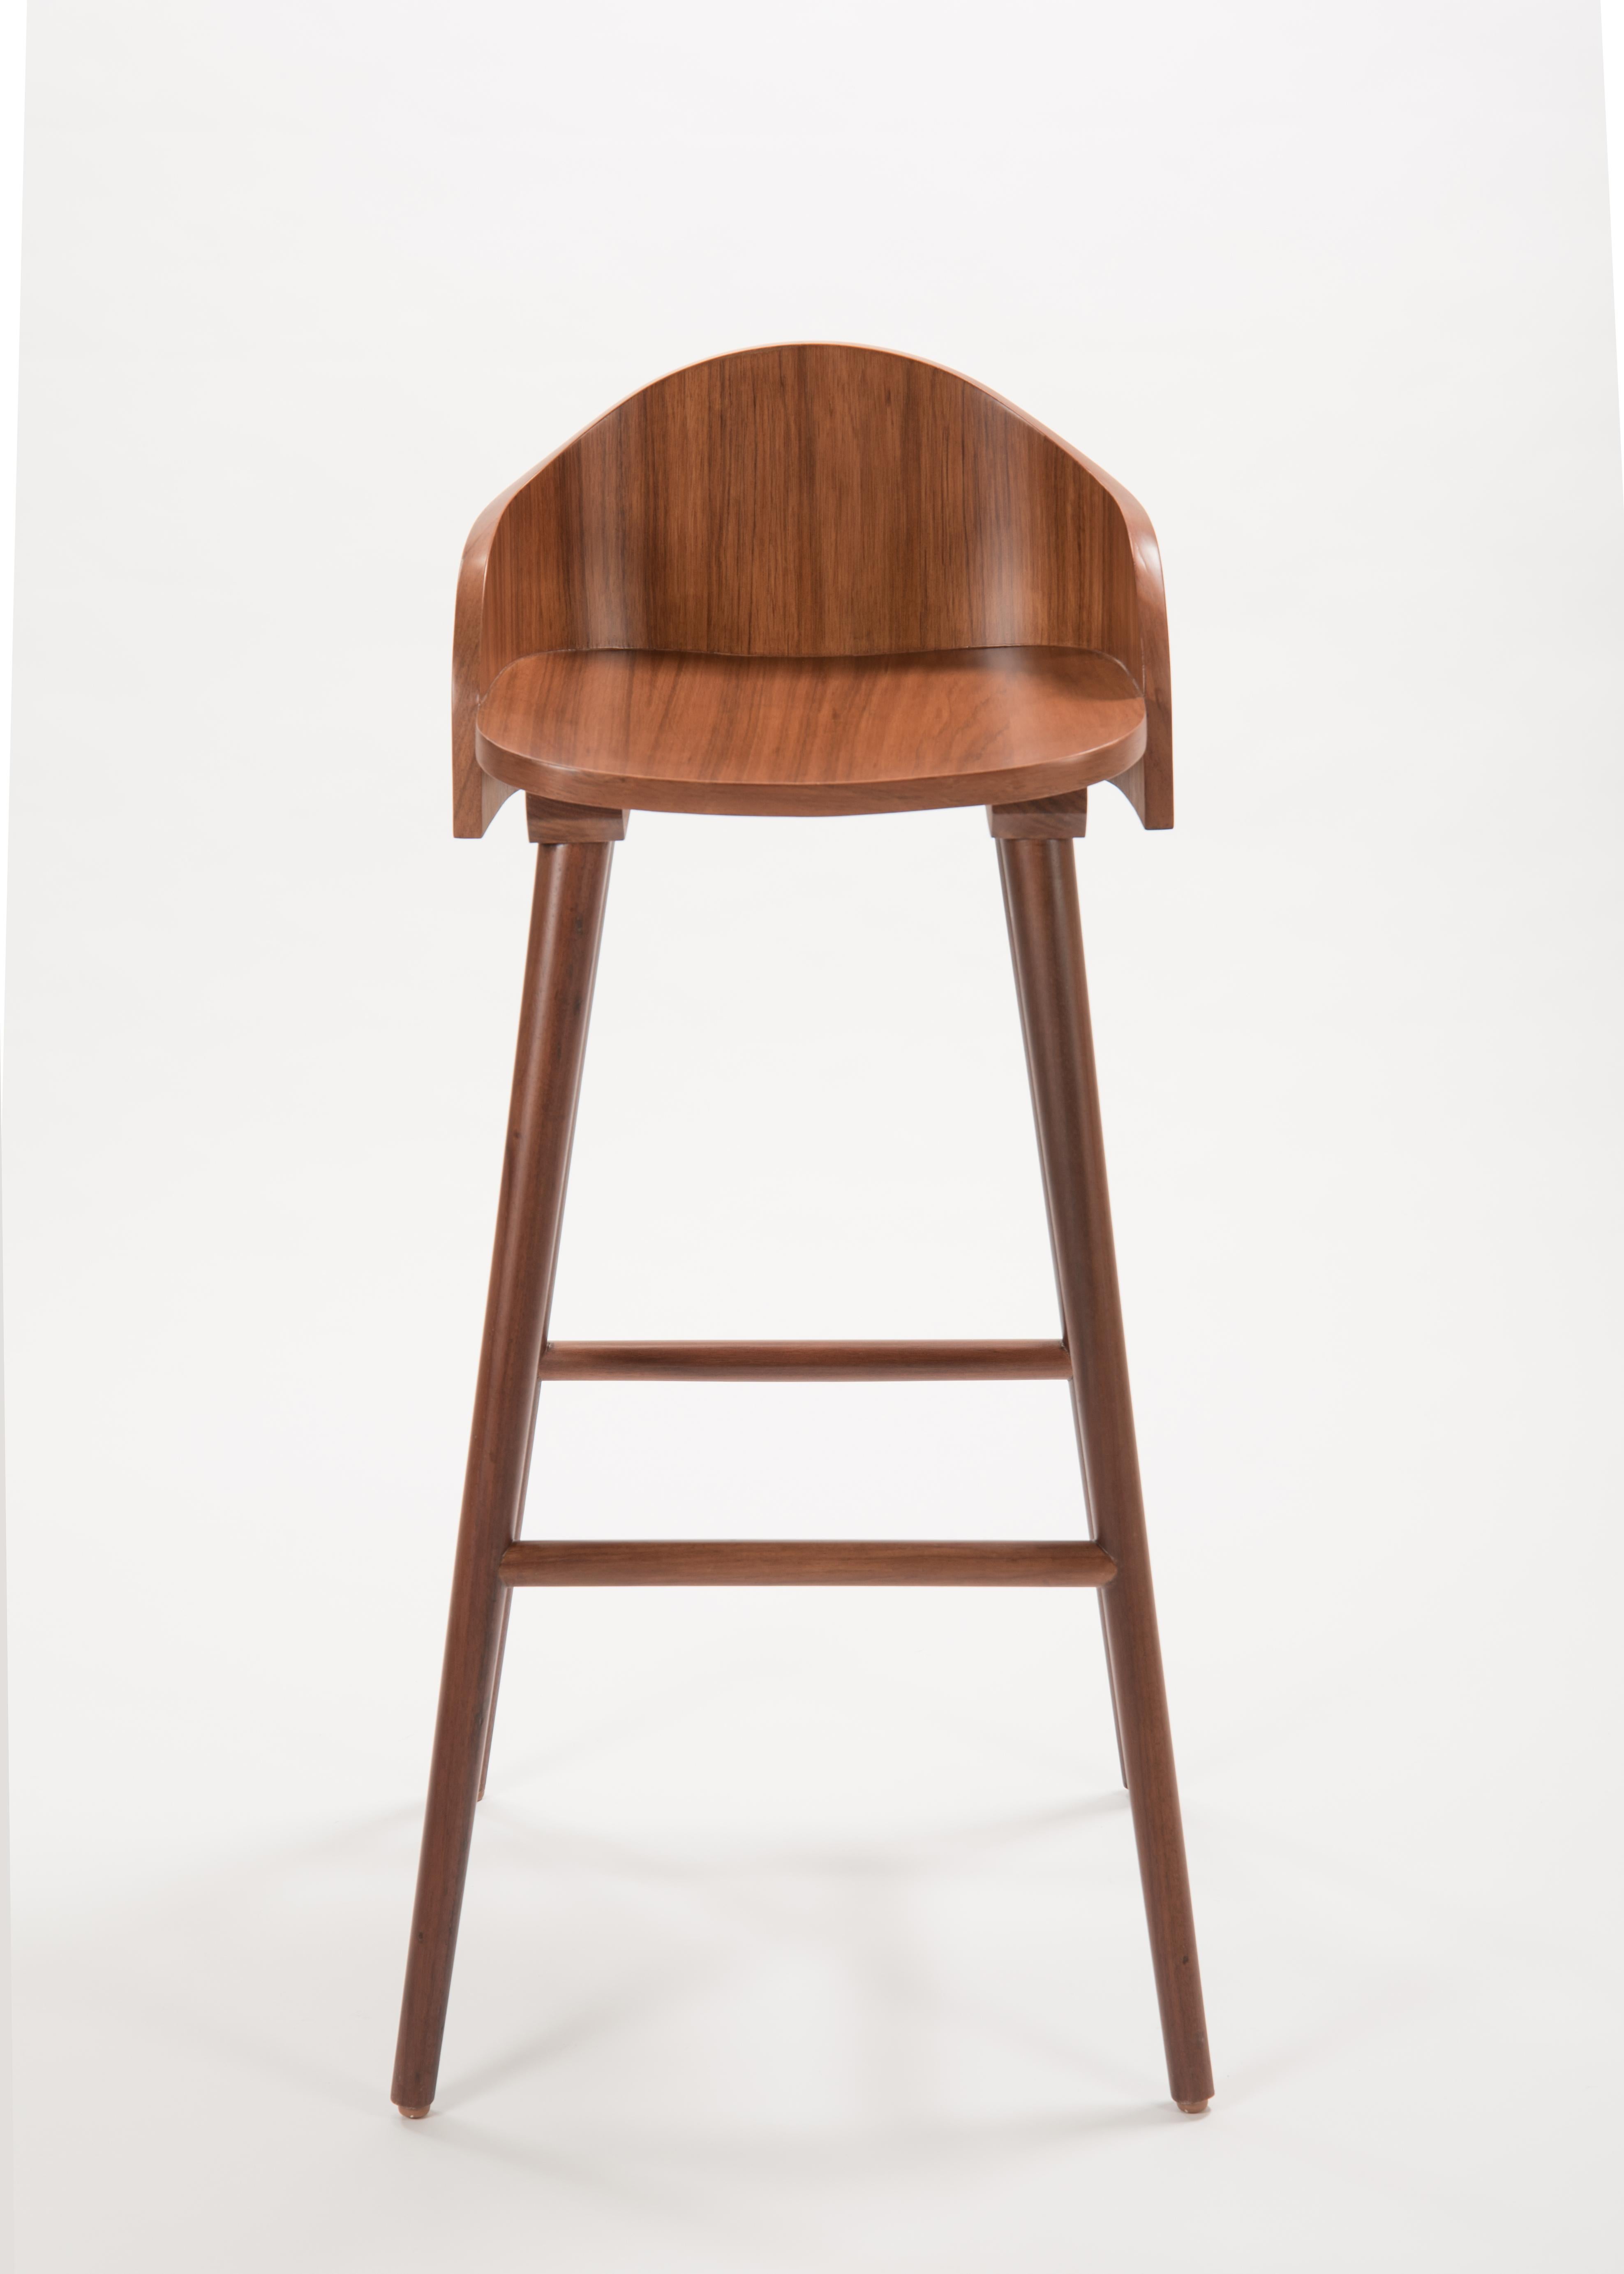 The peaceful movement of a wave flows by the stylized lines of the stools, refreshing in its organic design made with tzalam wood. Qualities such as definition, symmetry and proportion, allows the Ola stools to be a pleasant contrast to tables and